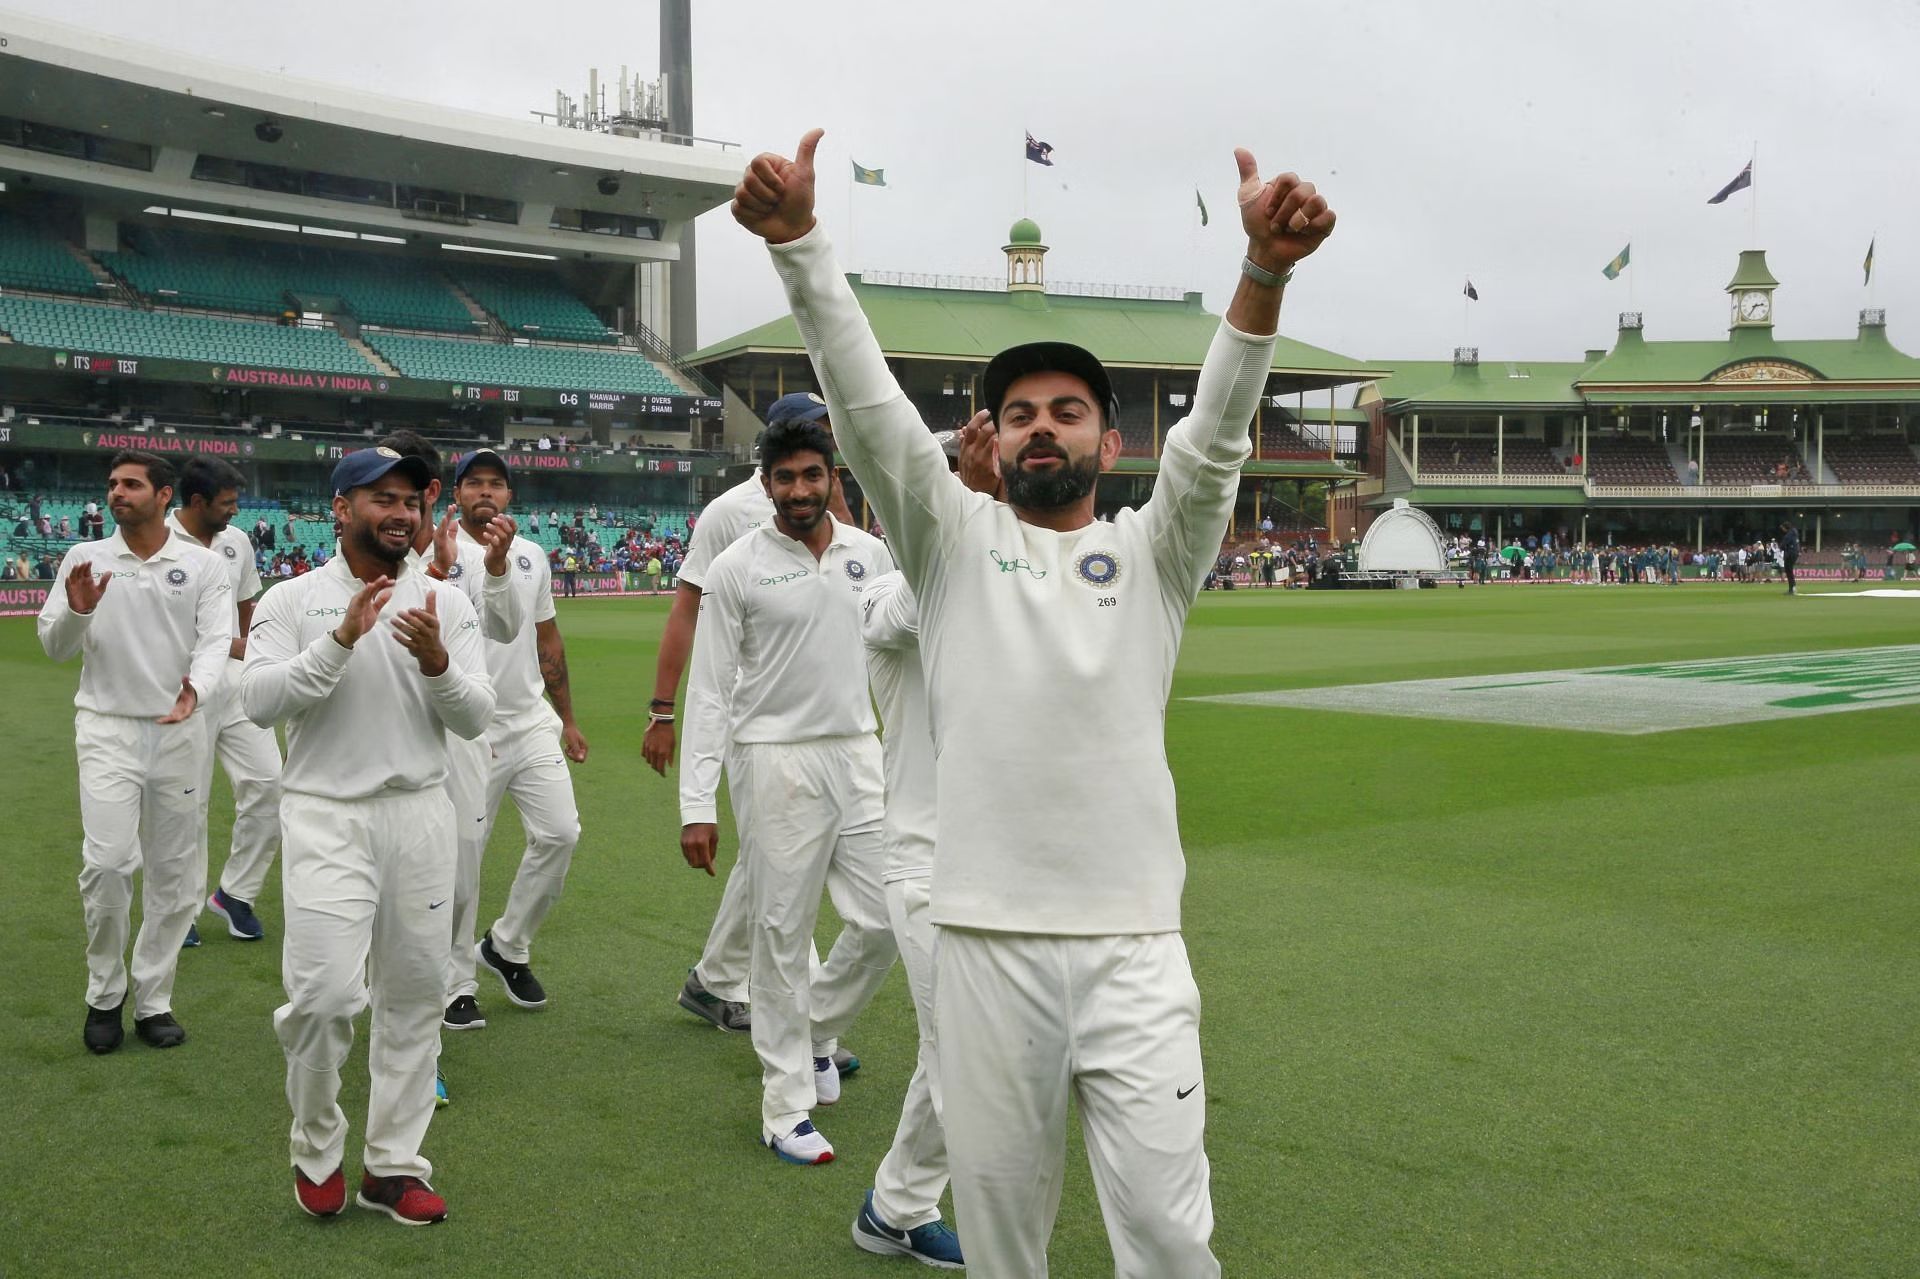 It was under Kohli that Team India created history in Australia, registering their maiden Test series win Down Under in 2018-19. India got the better of the Aussies by a 2-1 margin; the skipper contributing 282 runs at an average of 40.29. (Pic: Getty Images)